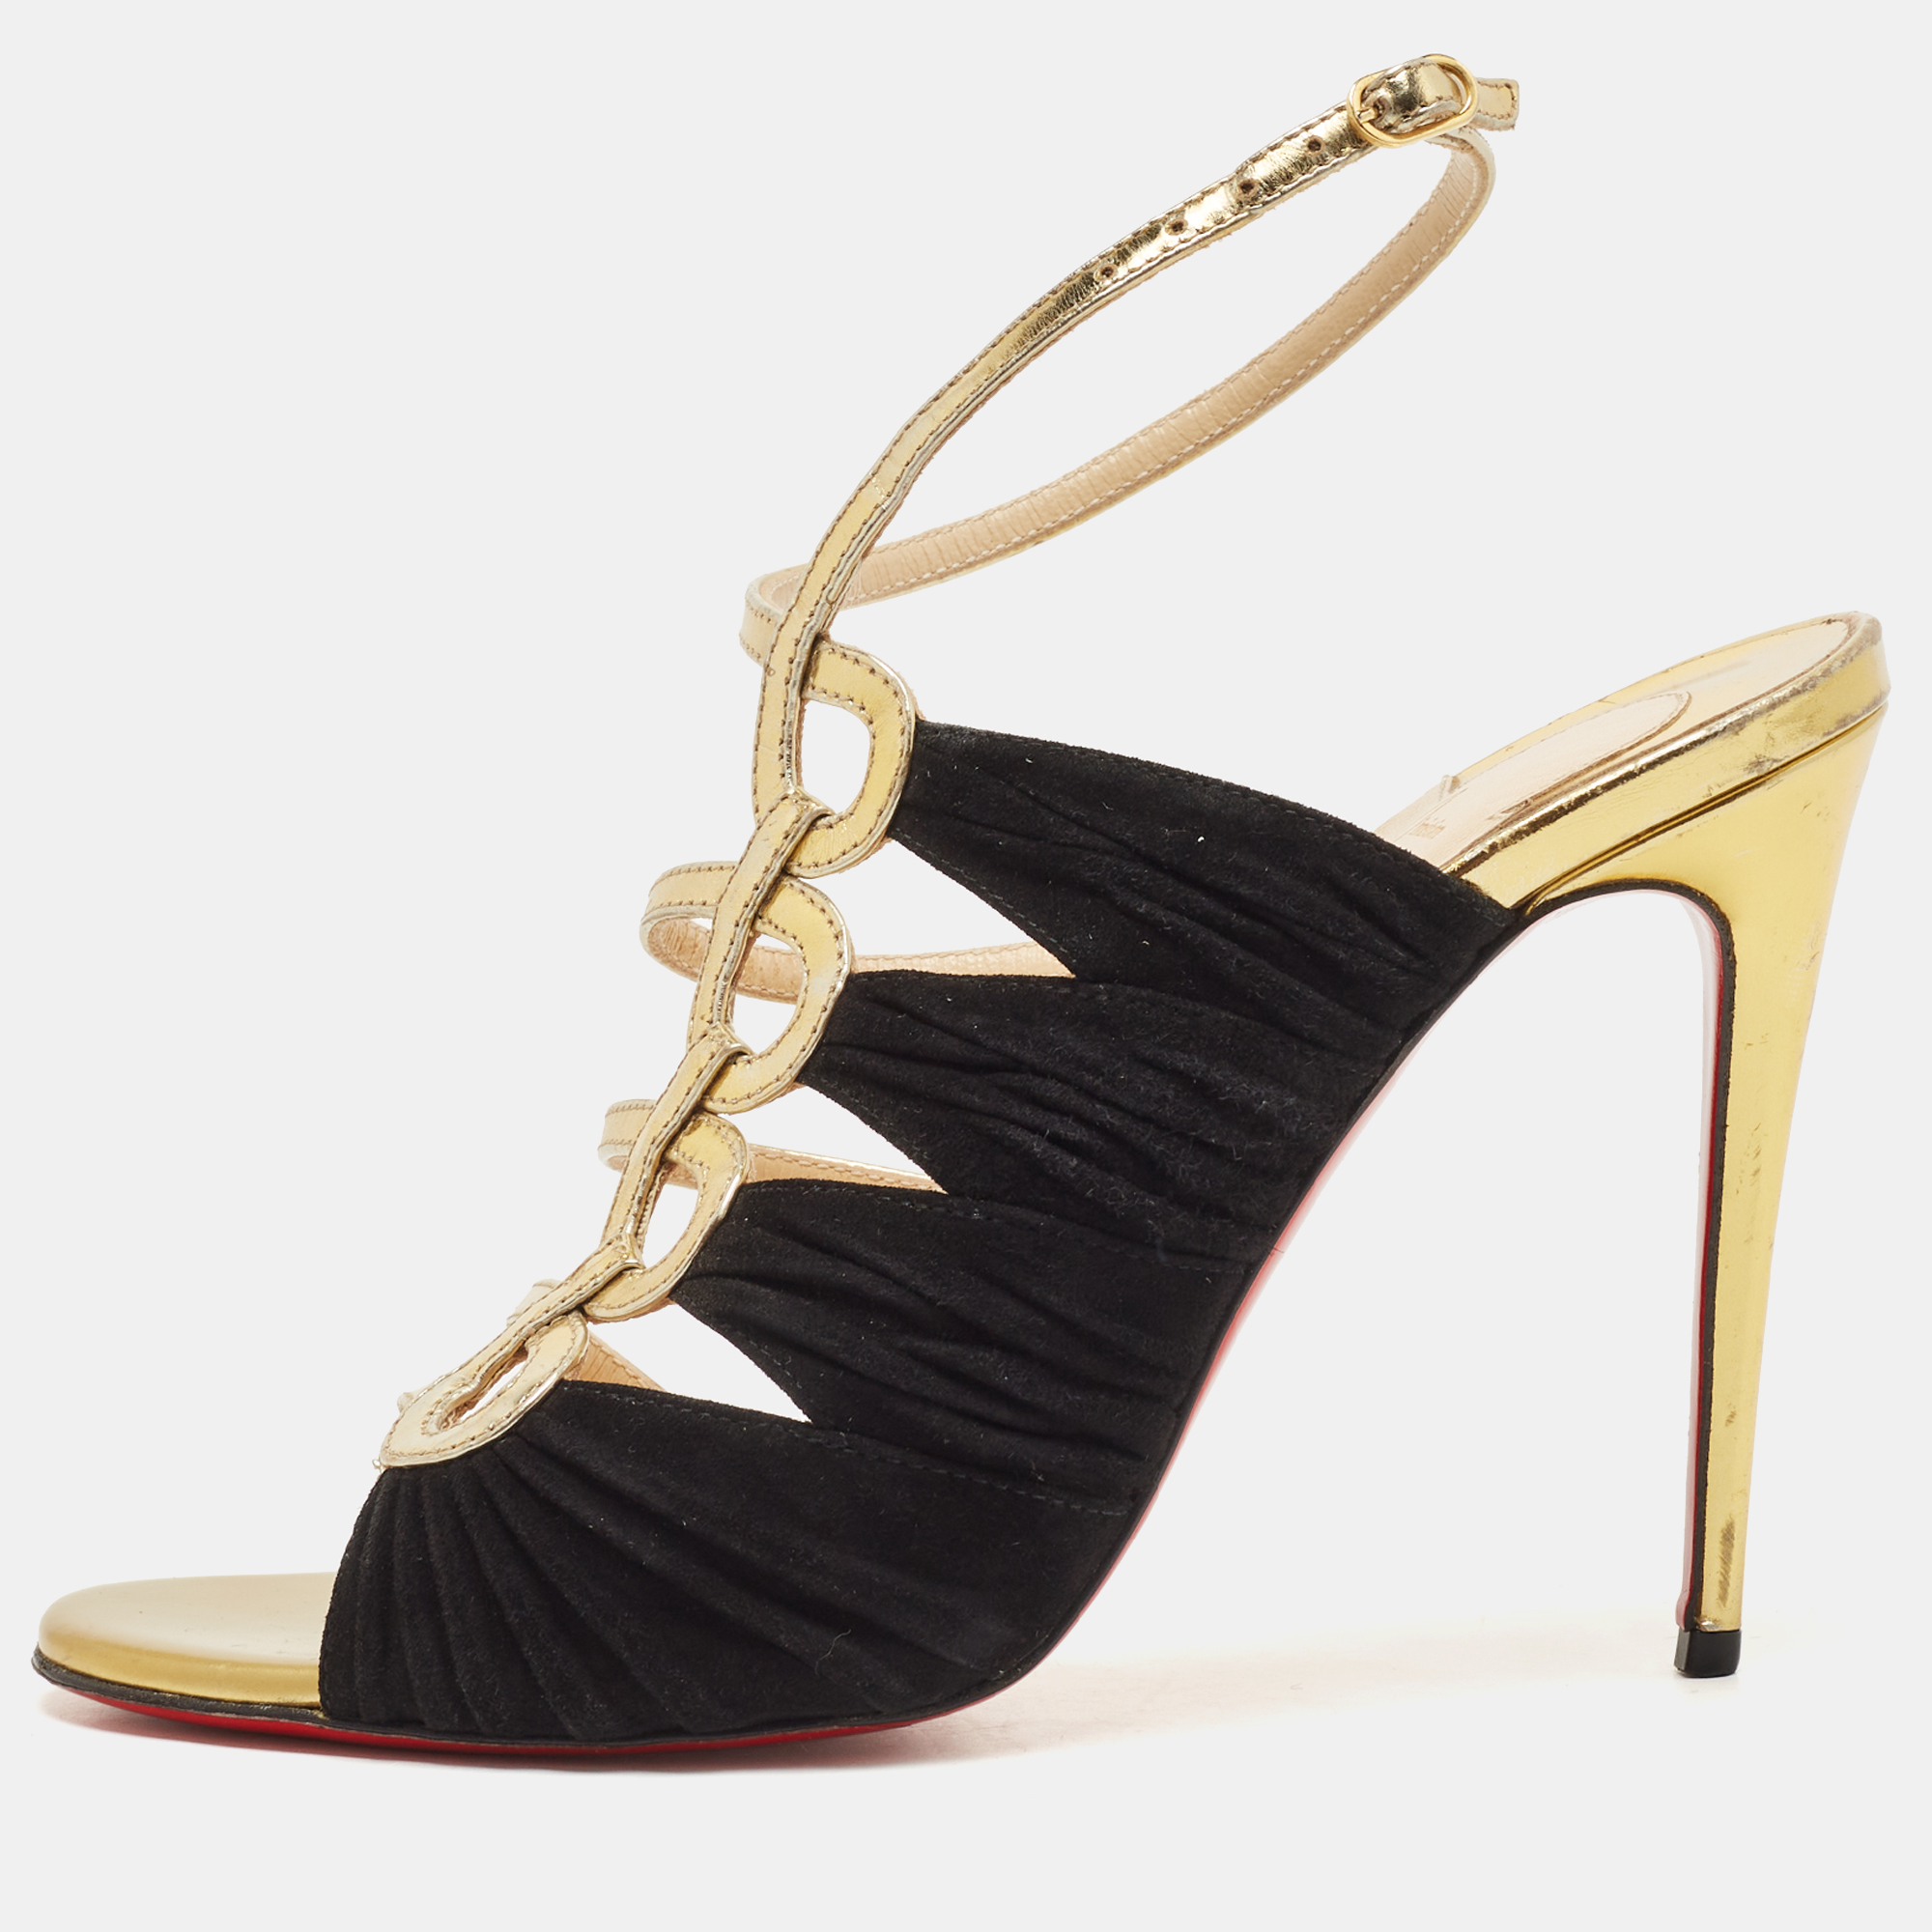 Christian Louboutin Black/Gold Suede And Leather Tina Sandals Size 37.5